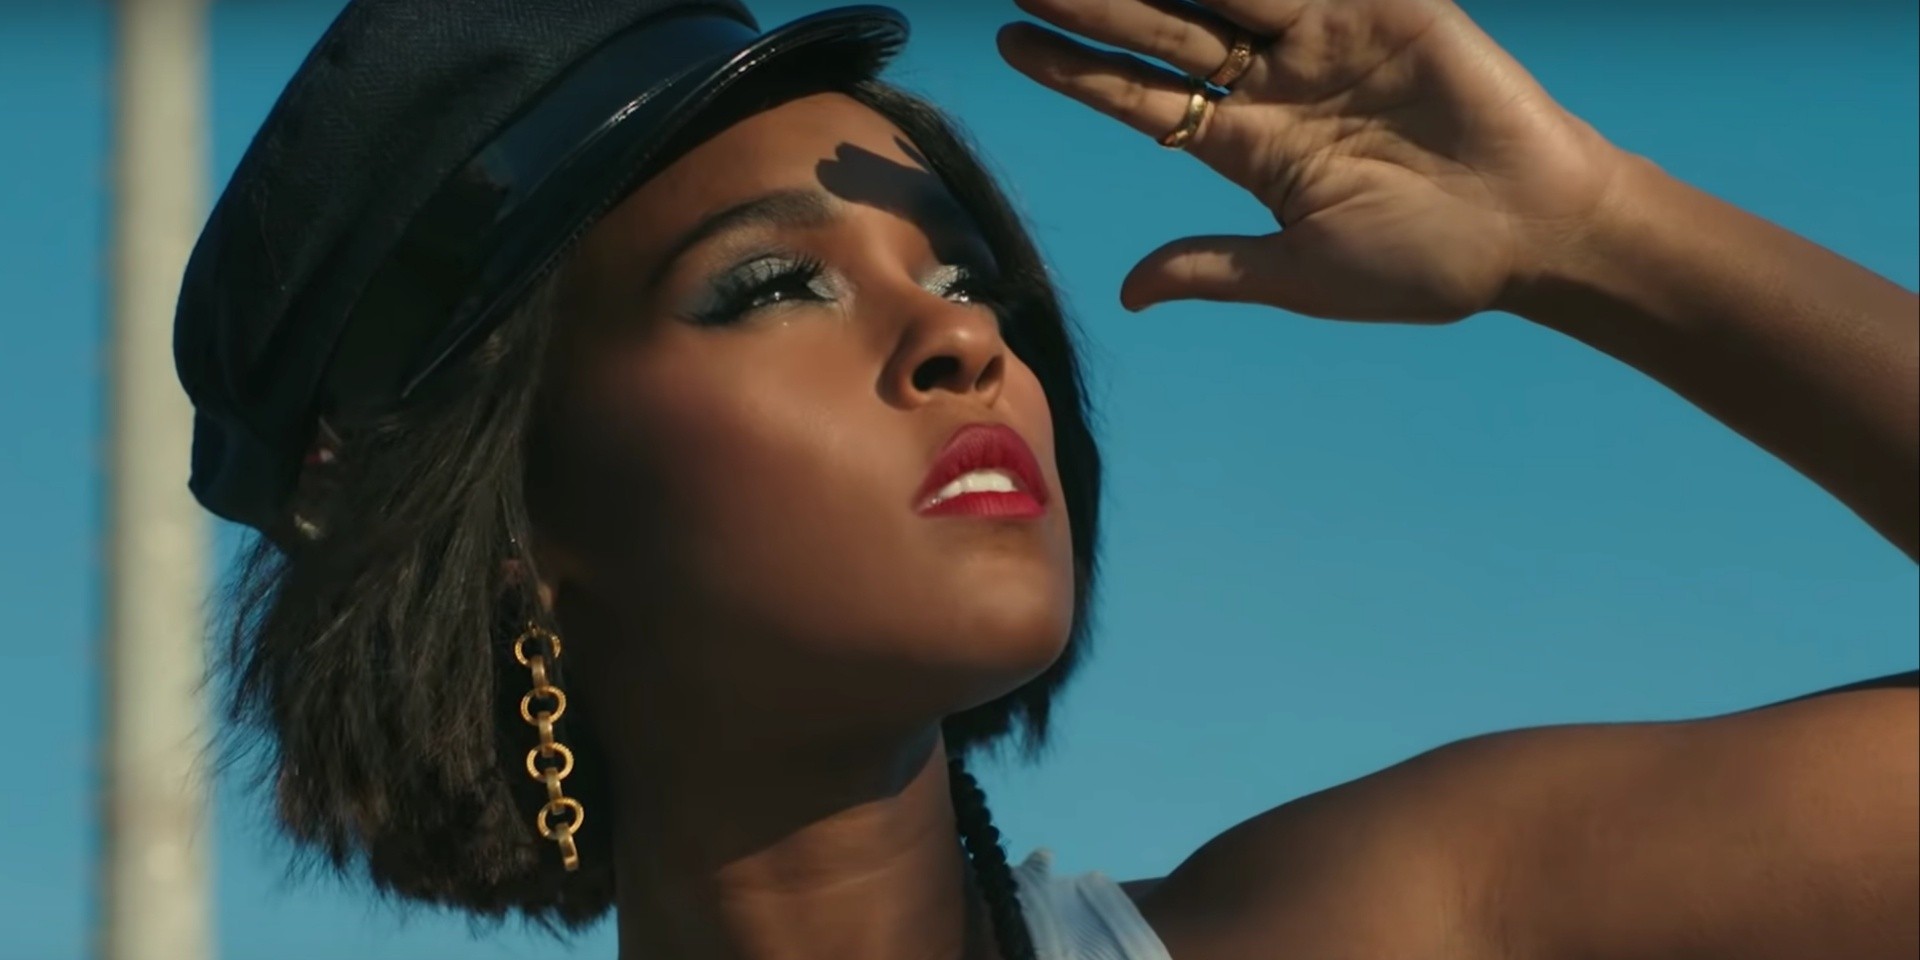 Janelle Monáe escapes from the oppressor with Zoë Kravitz in music video for "Screwed" – watch